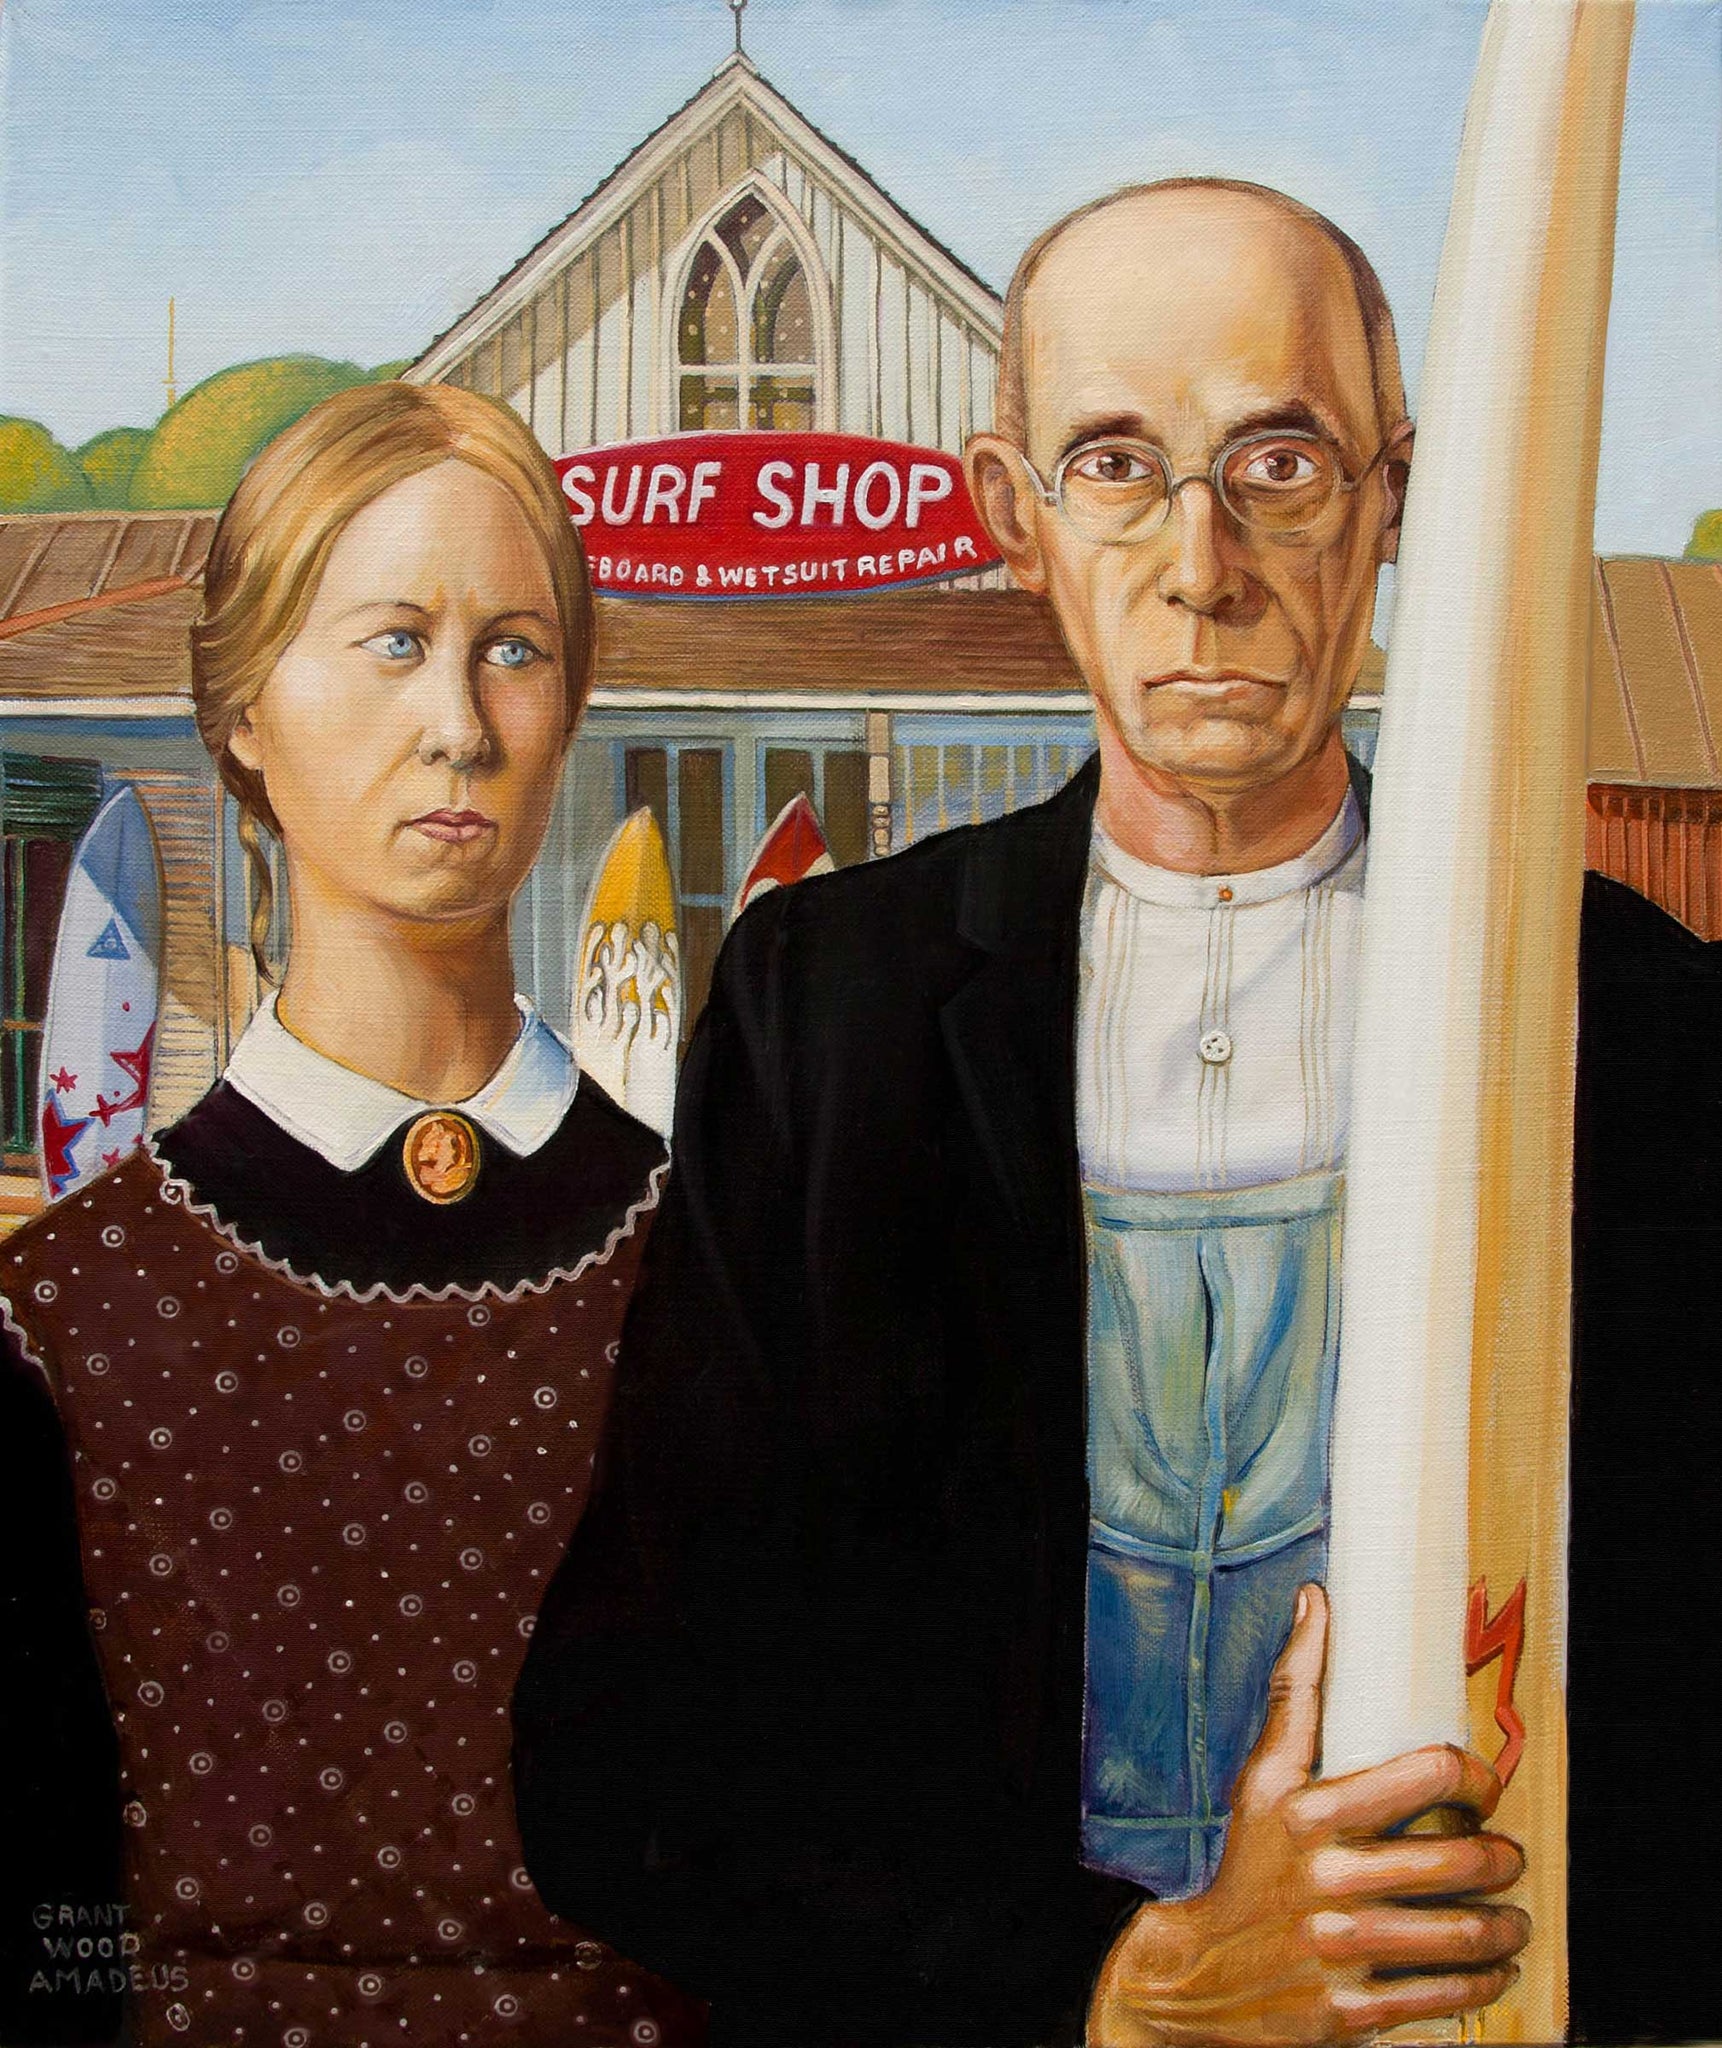 American gothic with a surf shop